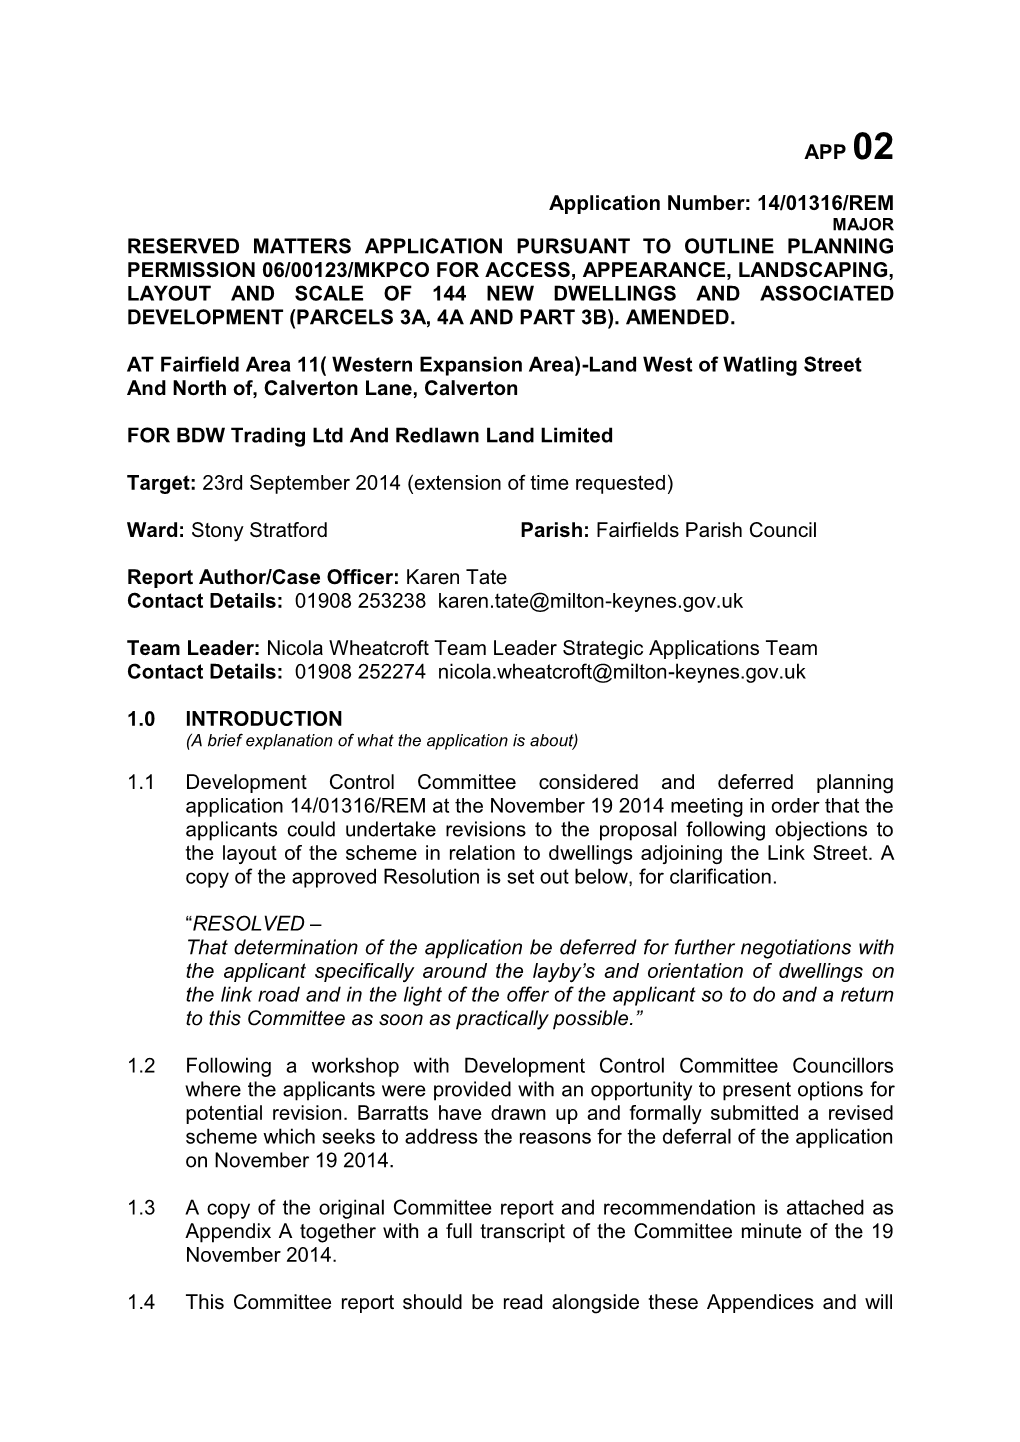 APP 02 Application Number: 14/01316/REM RESERVED MATTERS APPLICATION PURSUANT to OUTLINE PLANNING PERMISSION 06/00123/MKPCO